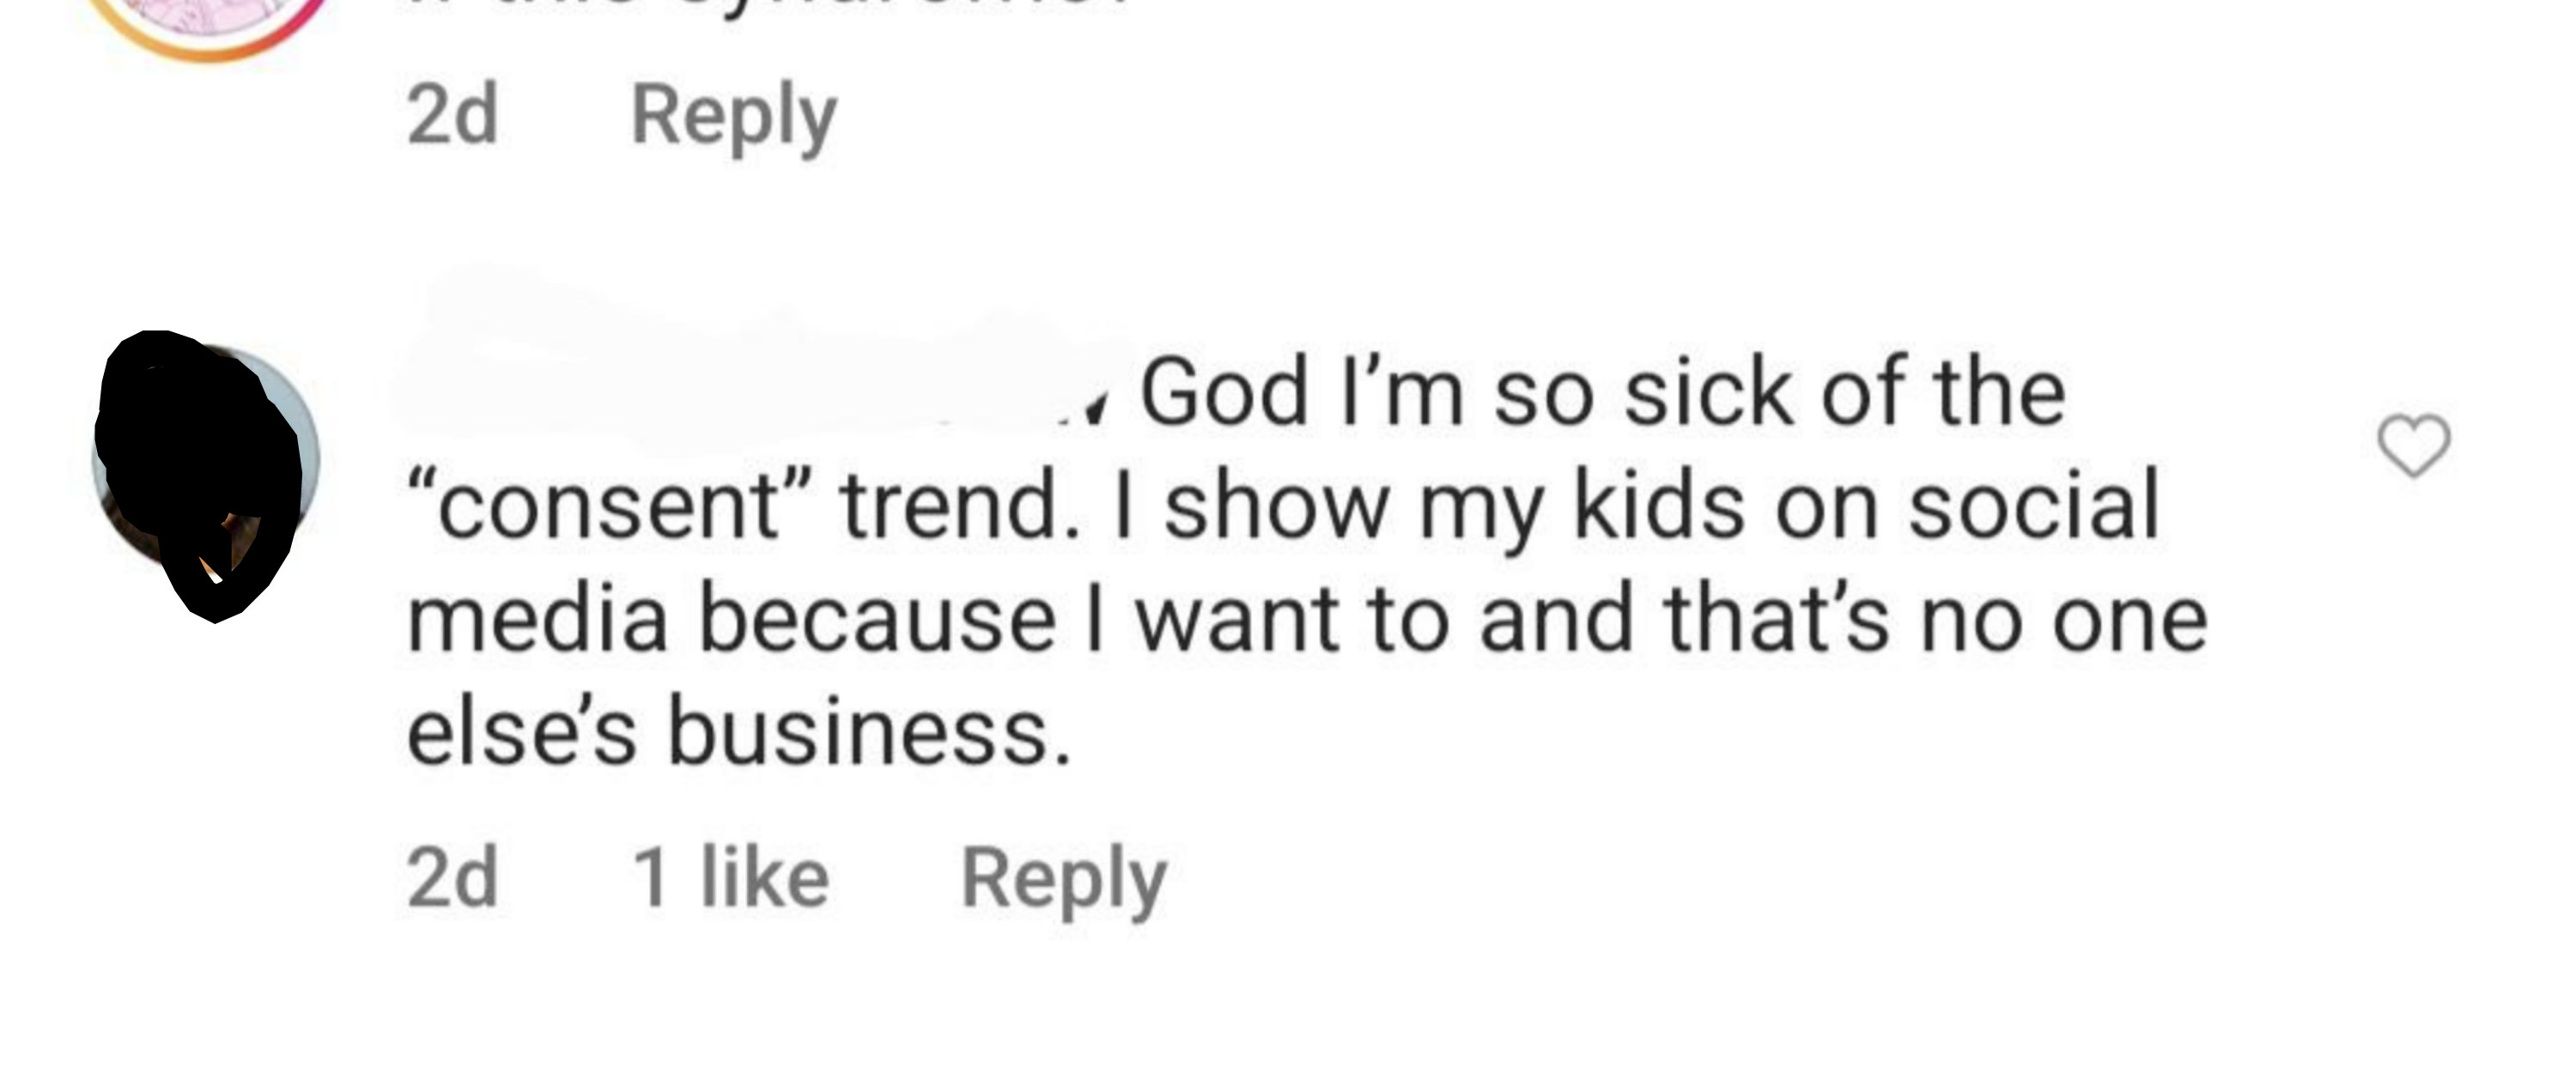 A parent says &quot;I&#x27;m so sick of the consent trend, I show my kids on social media because I want to and that&#x27;s no one else&#x27;s business&quot;